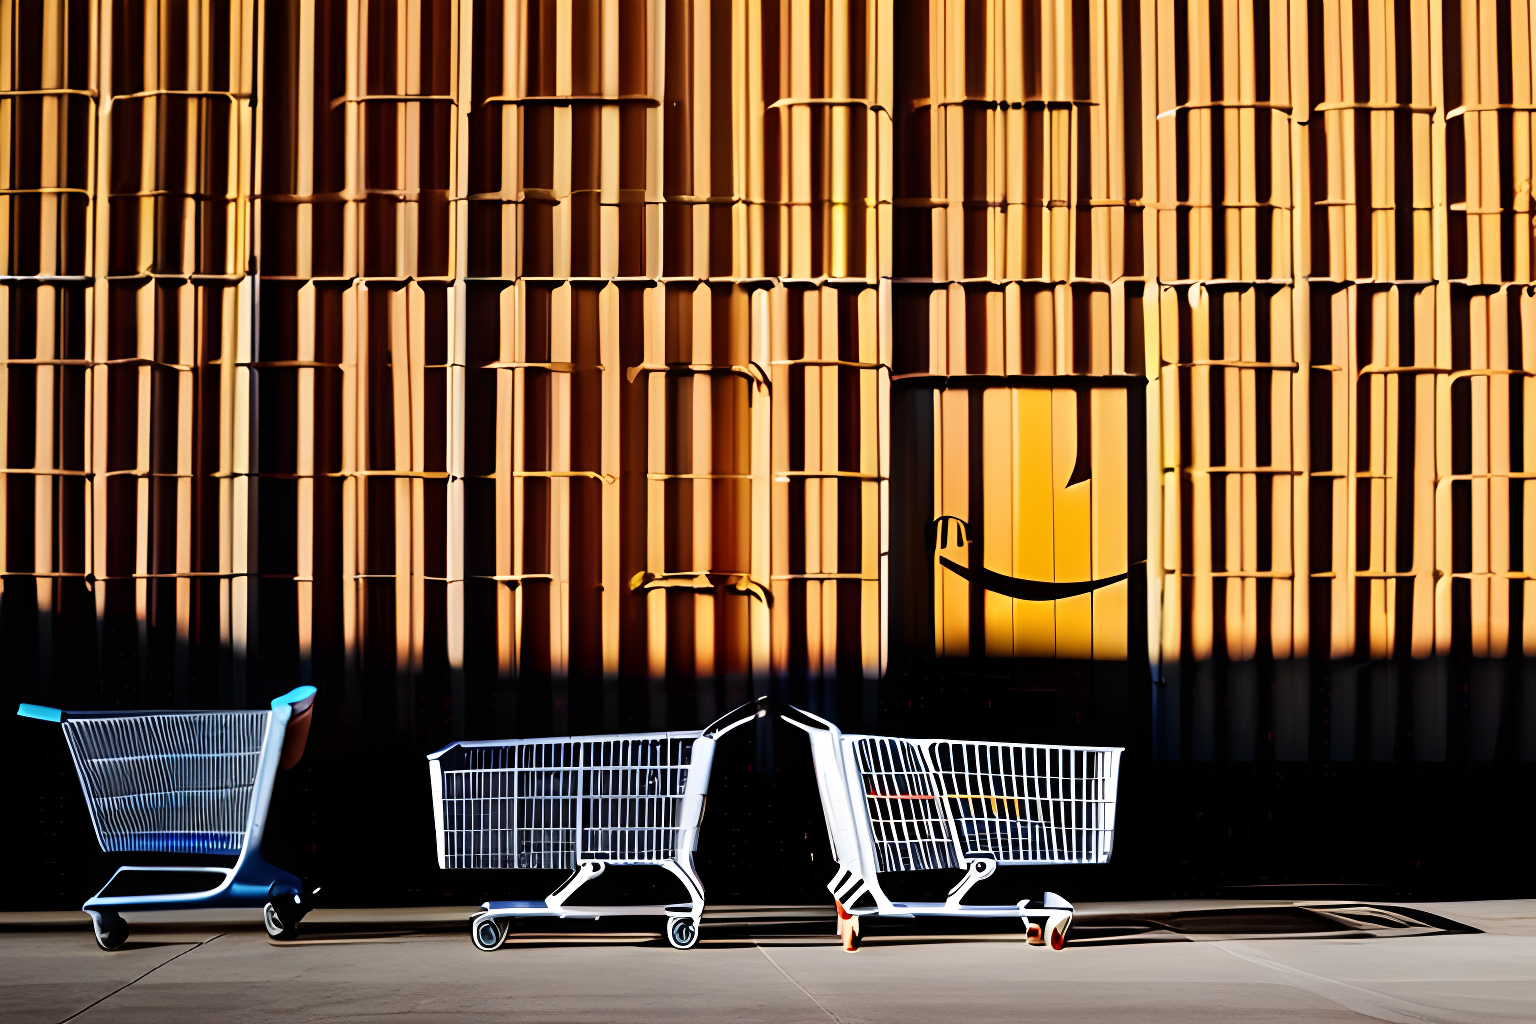 Shoppers with shopping carts in the shadows of an amazon warehouse